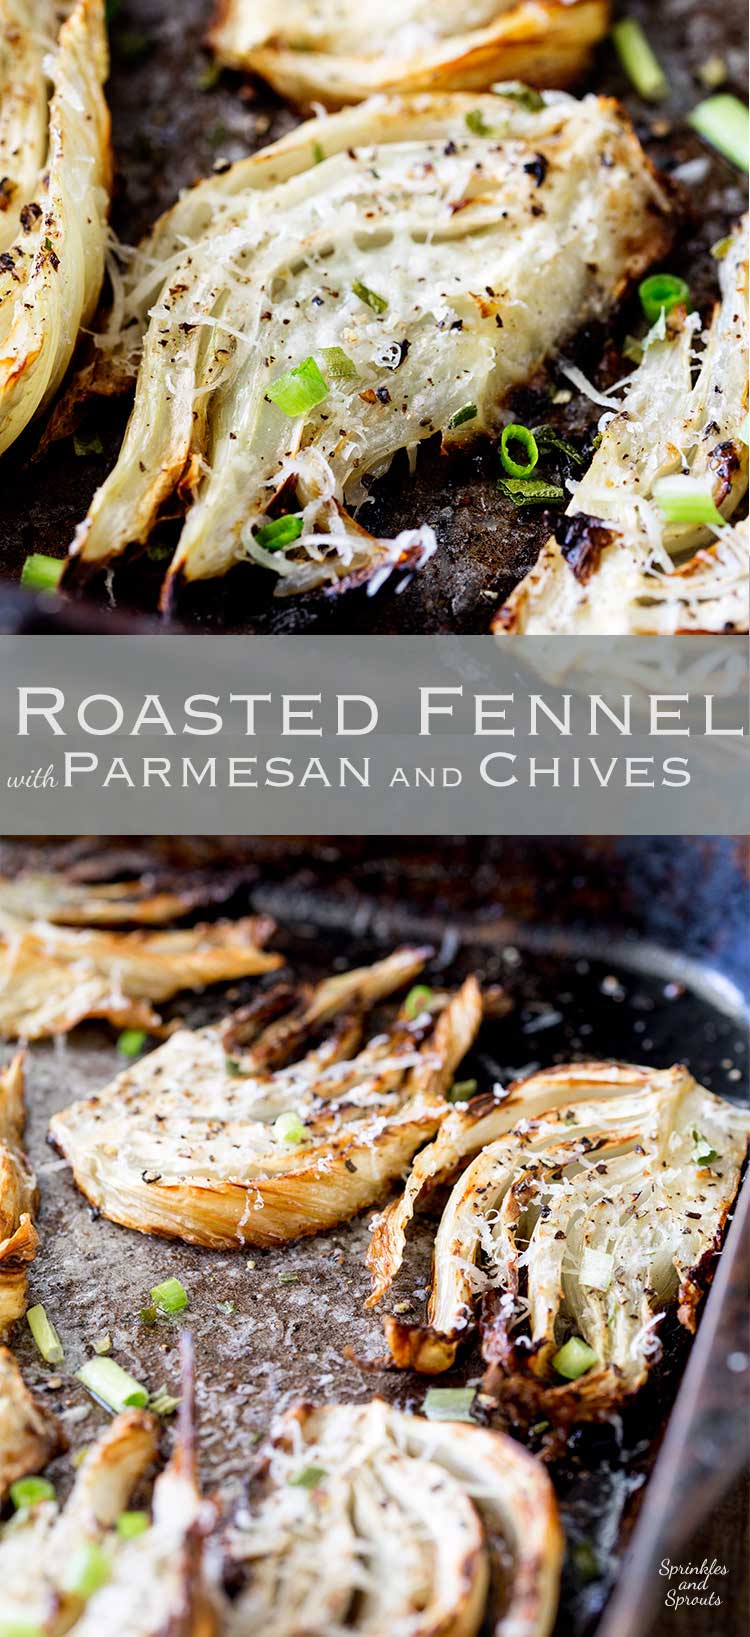 This roasted fennel dish is sweet and mellow and the perfect side for any occasion. It is simple to make and takes no effort as it roasts happily in the oven. Another great side recipe from Sprinkles and Sprouts